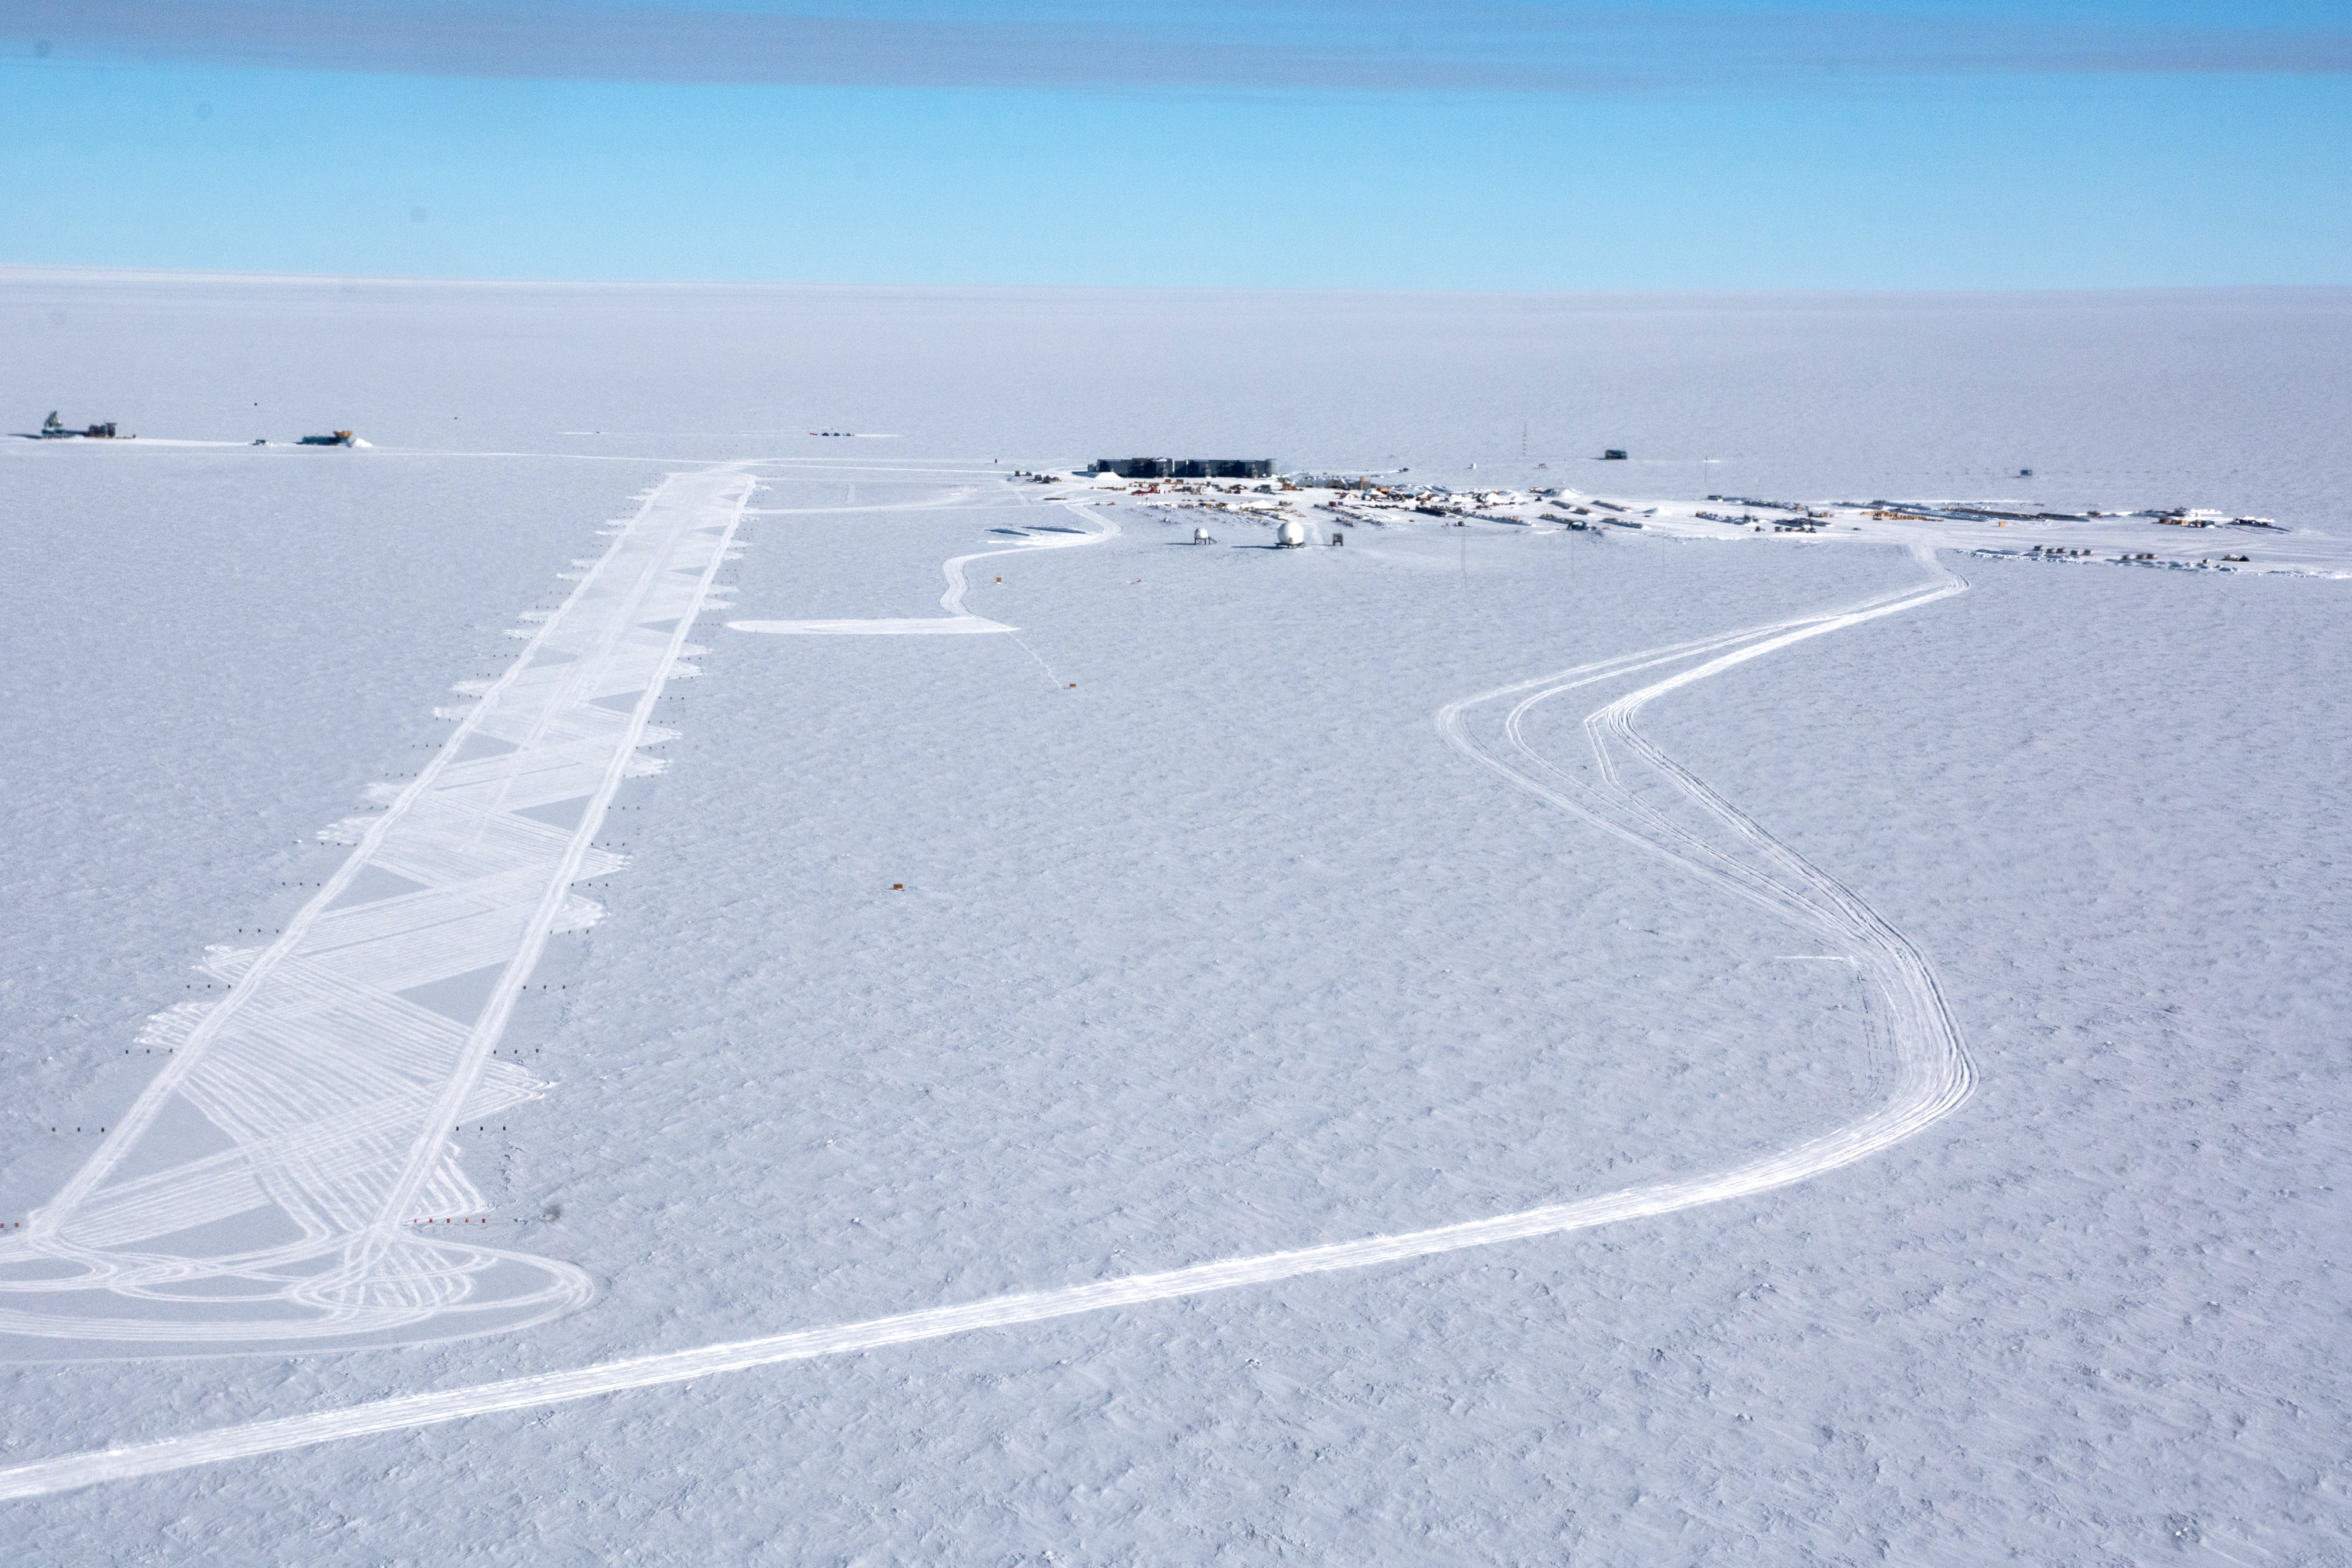 Aerial photos of buildings on a flat white snow surface.